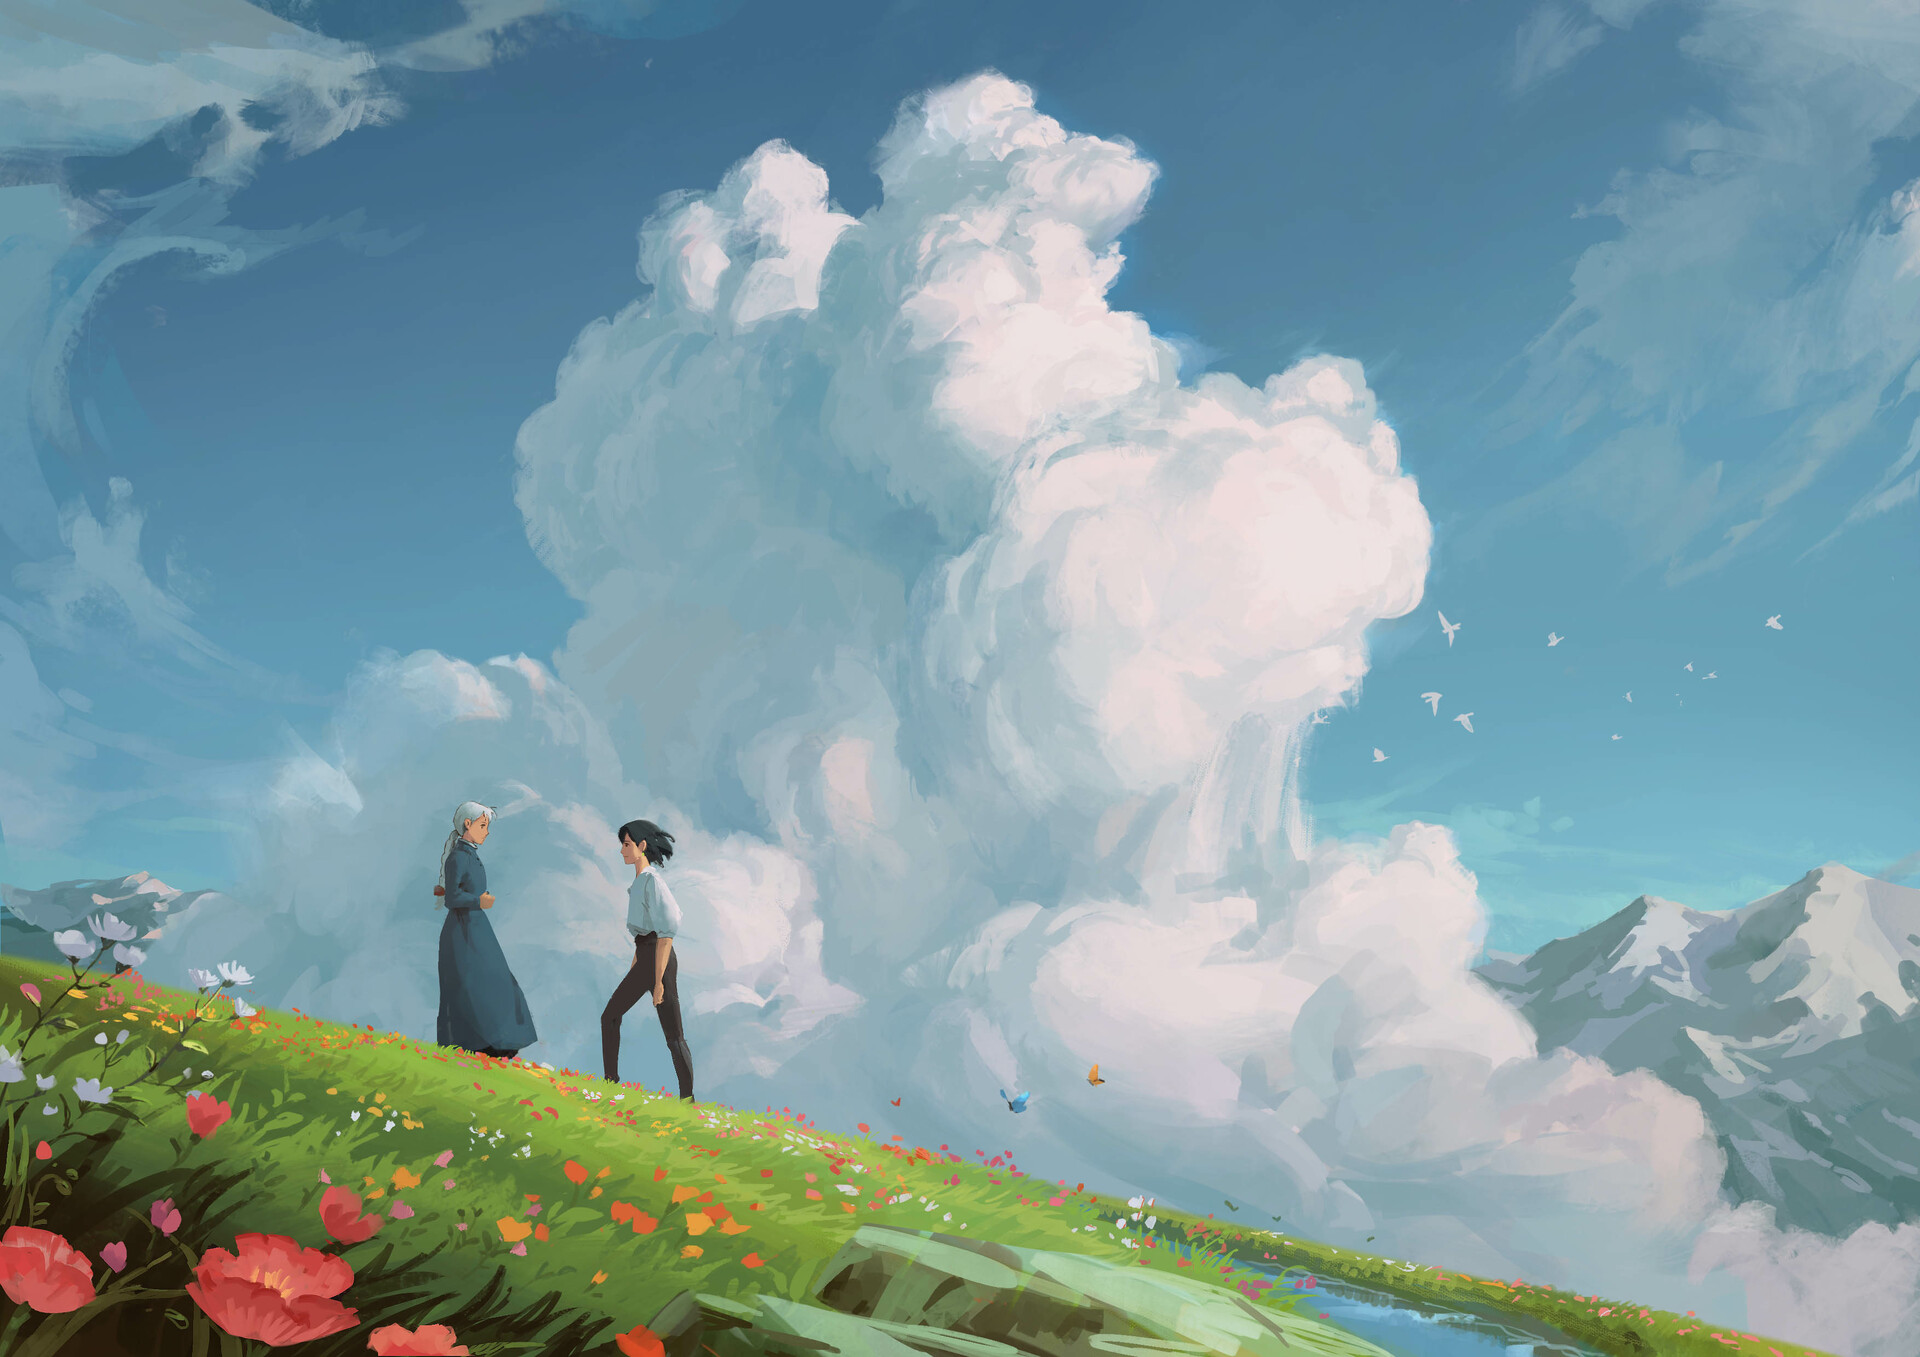 Howl & Sophie by Edward Chee